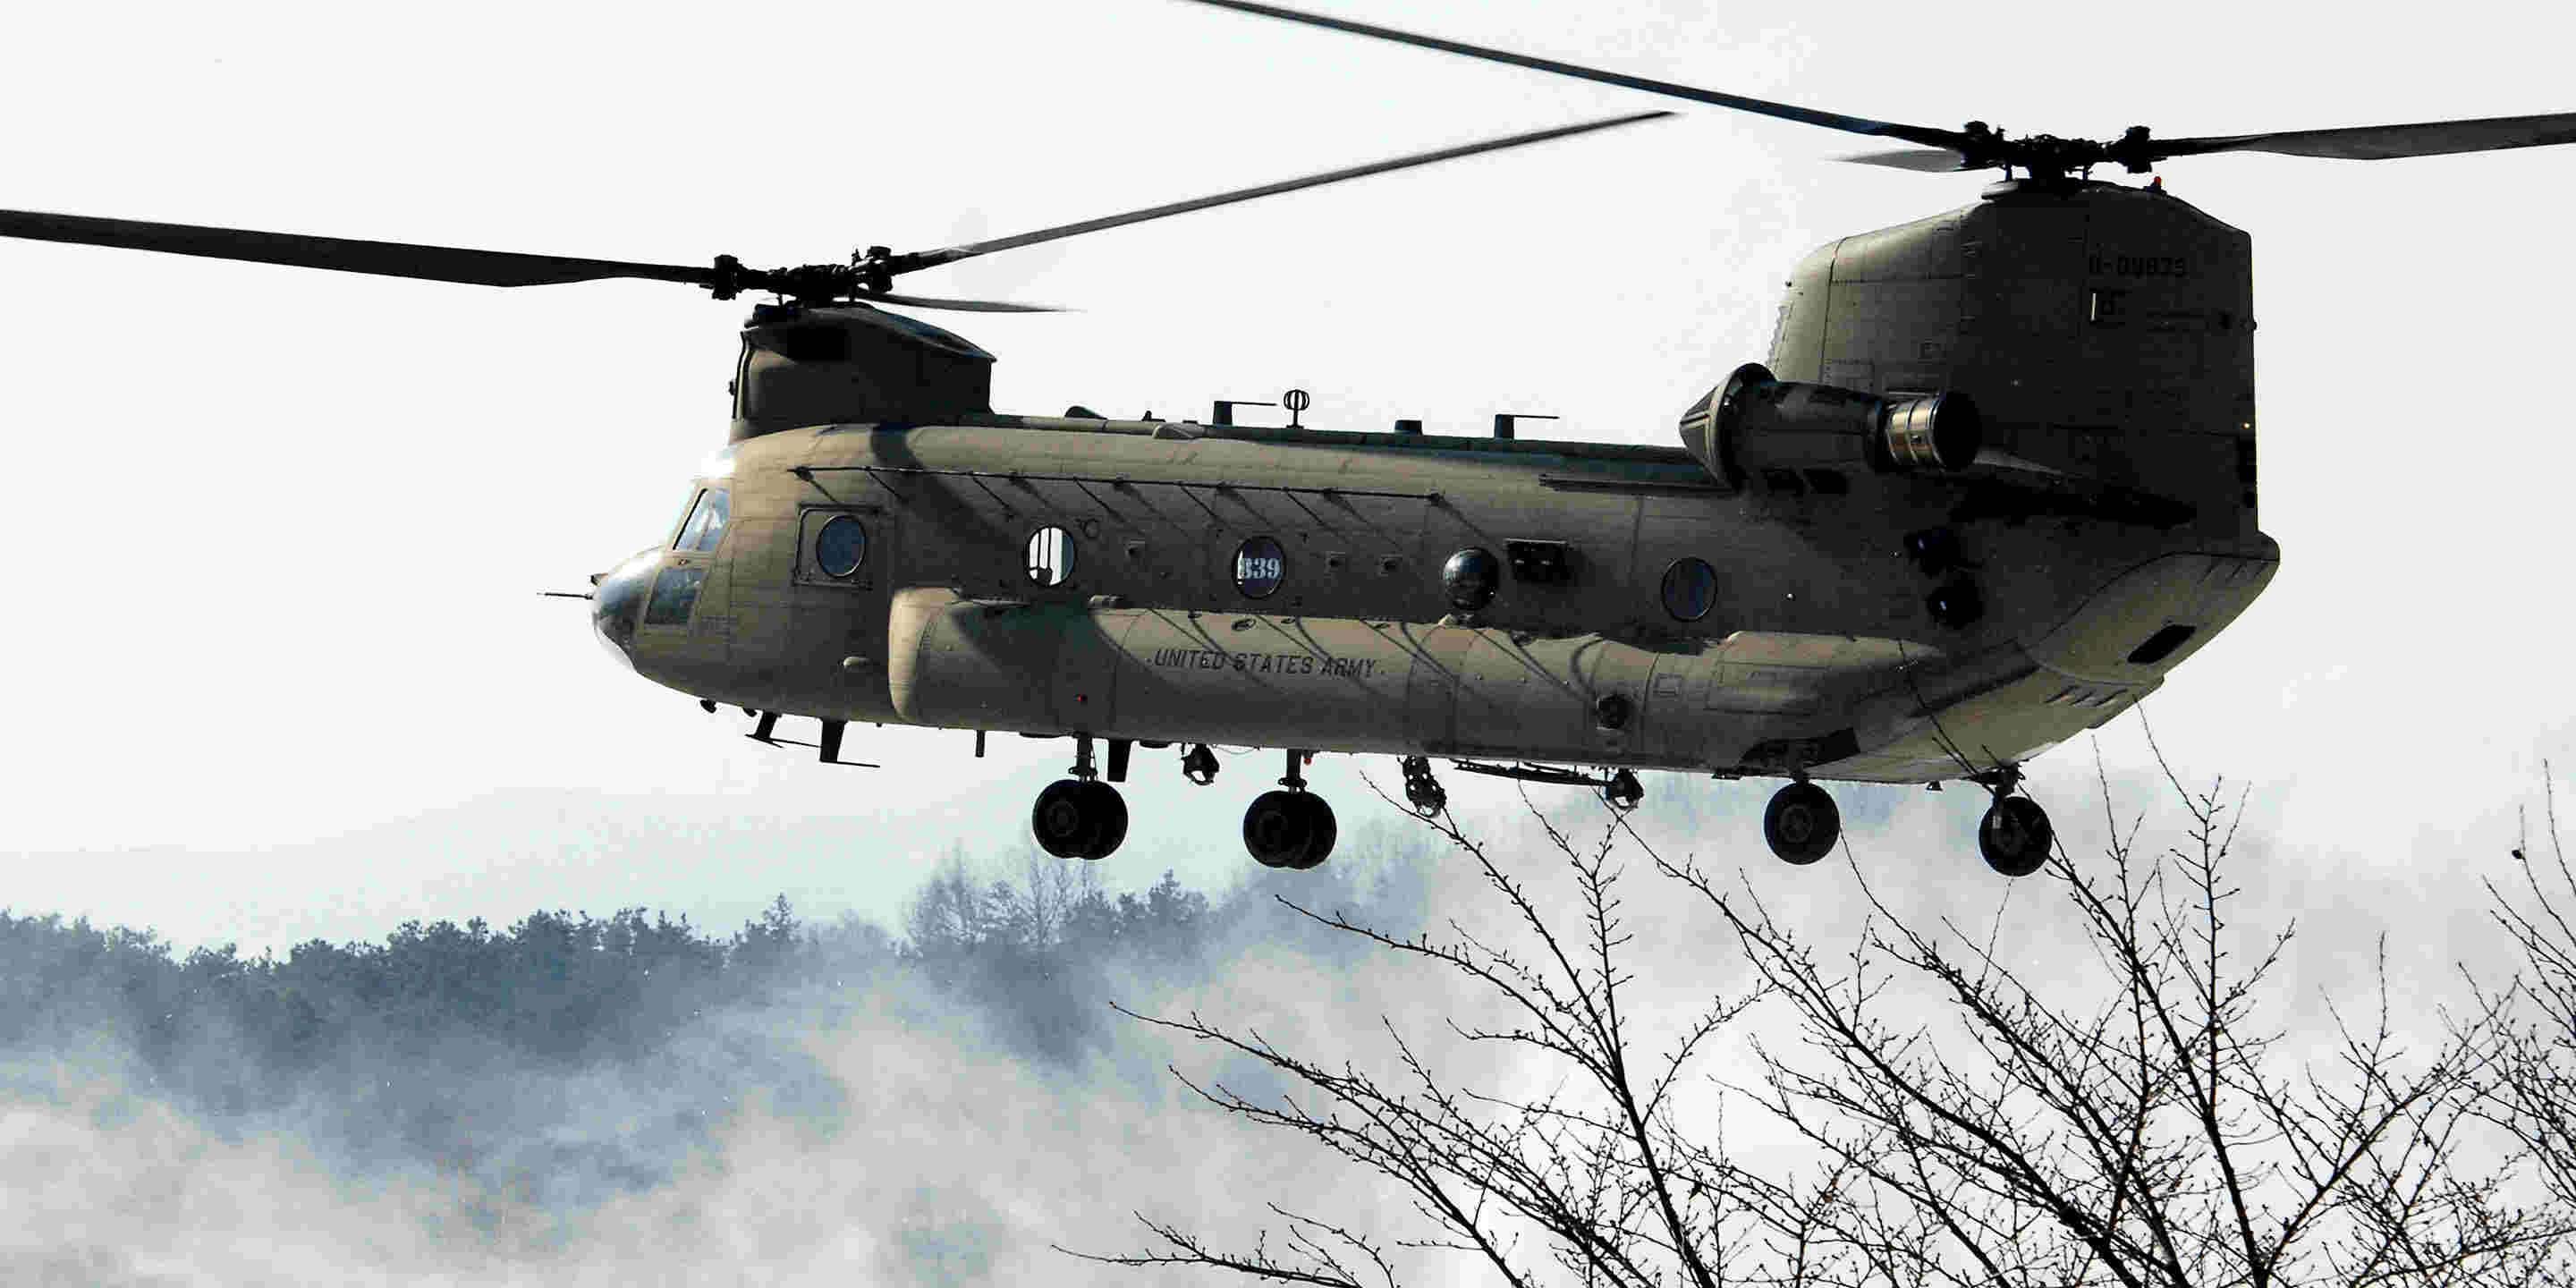 33 Things You Probably Don't Know About the CH-47 Chinook